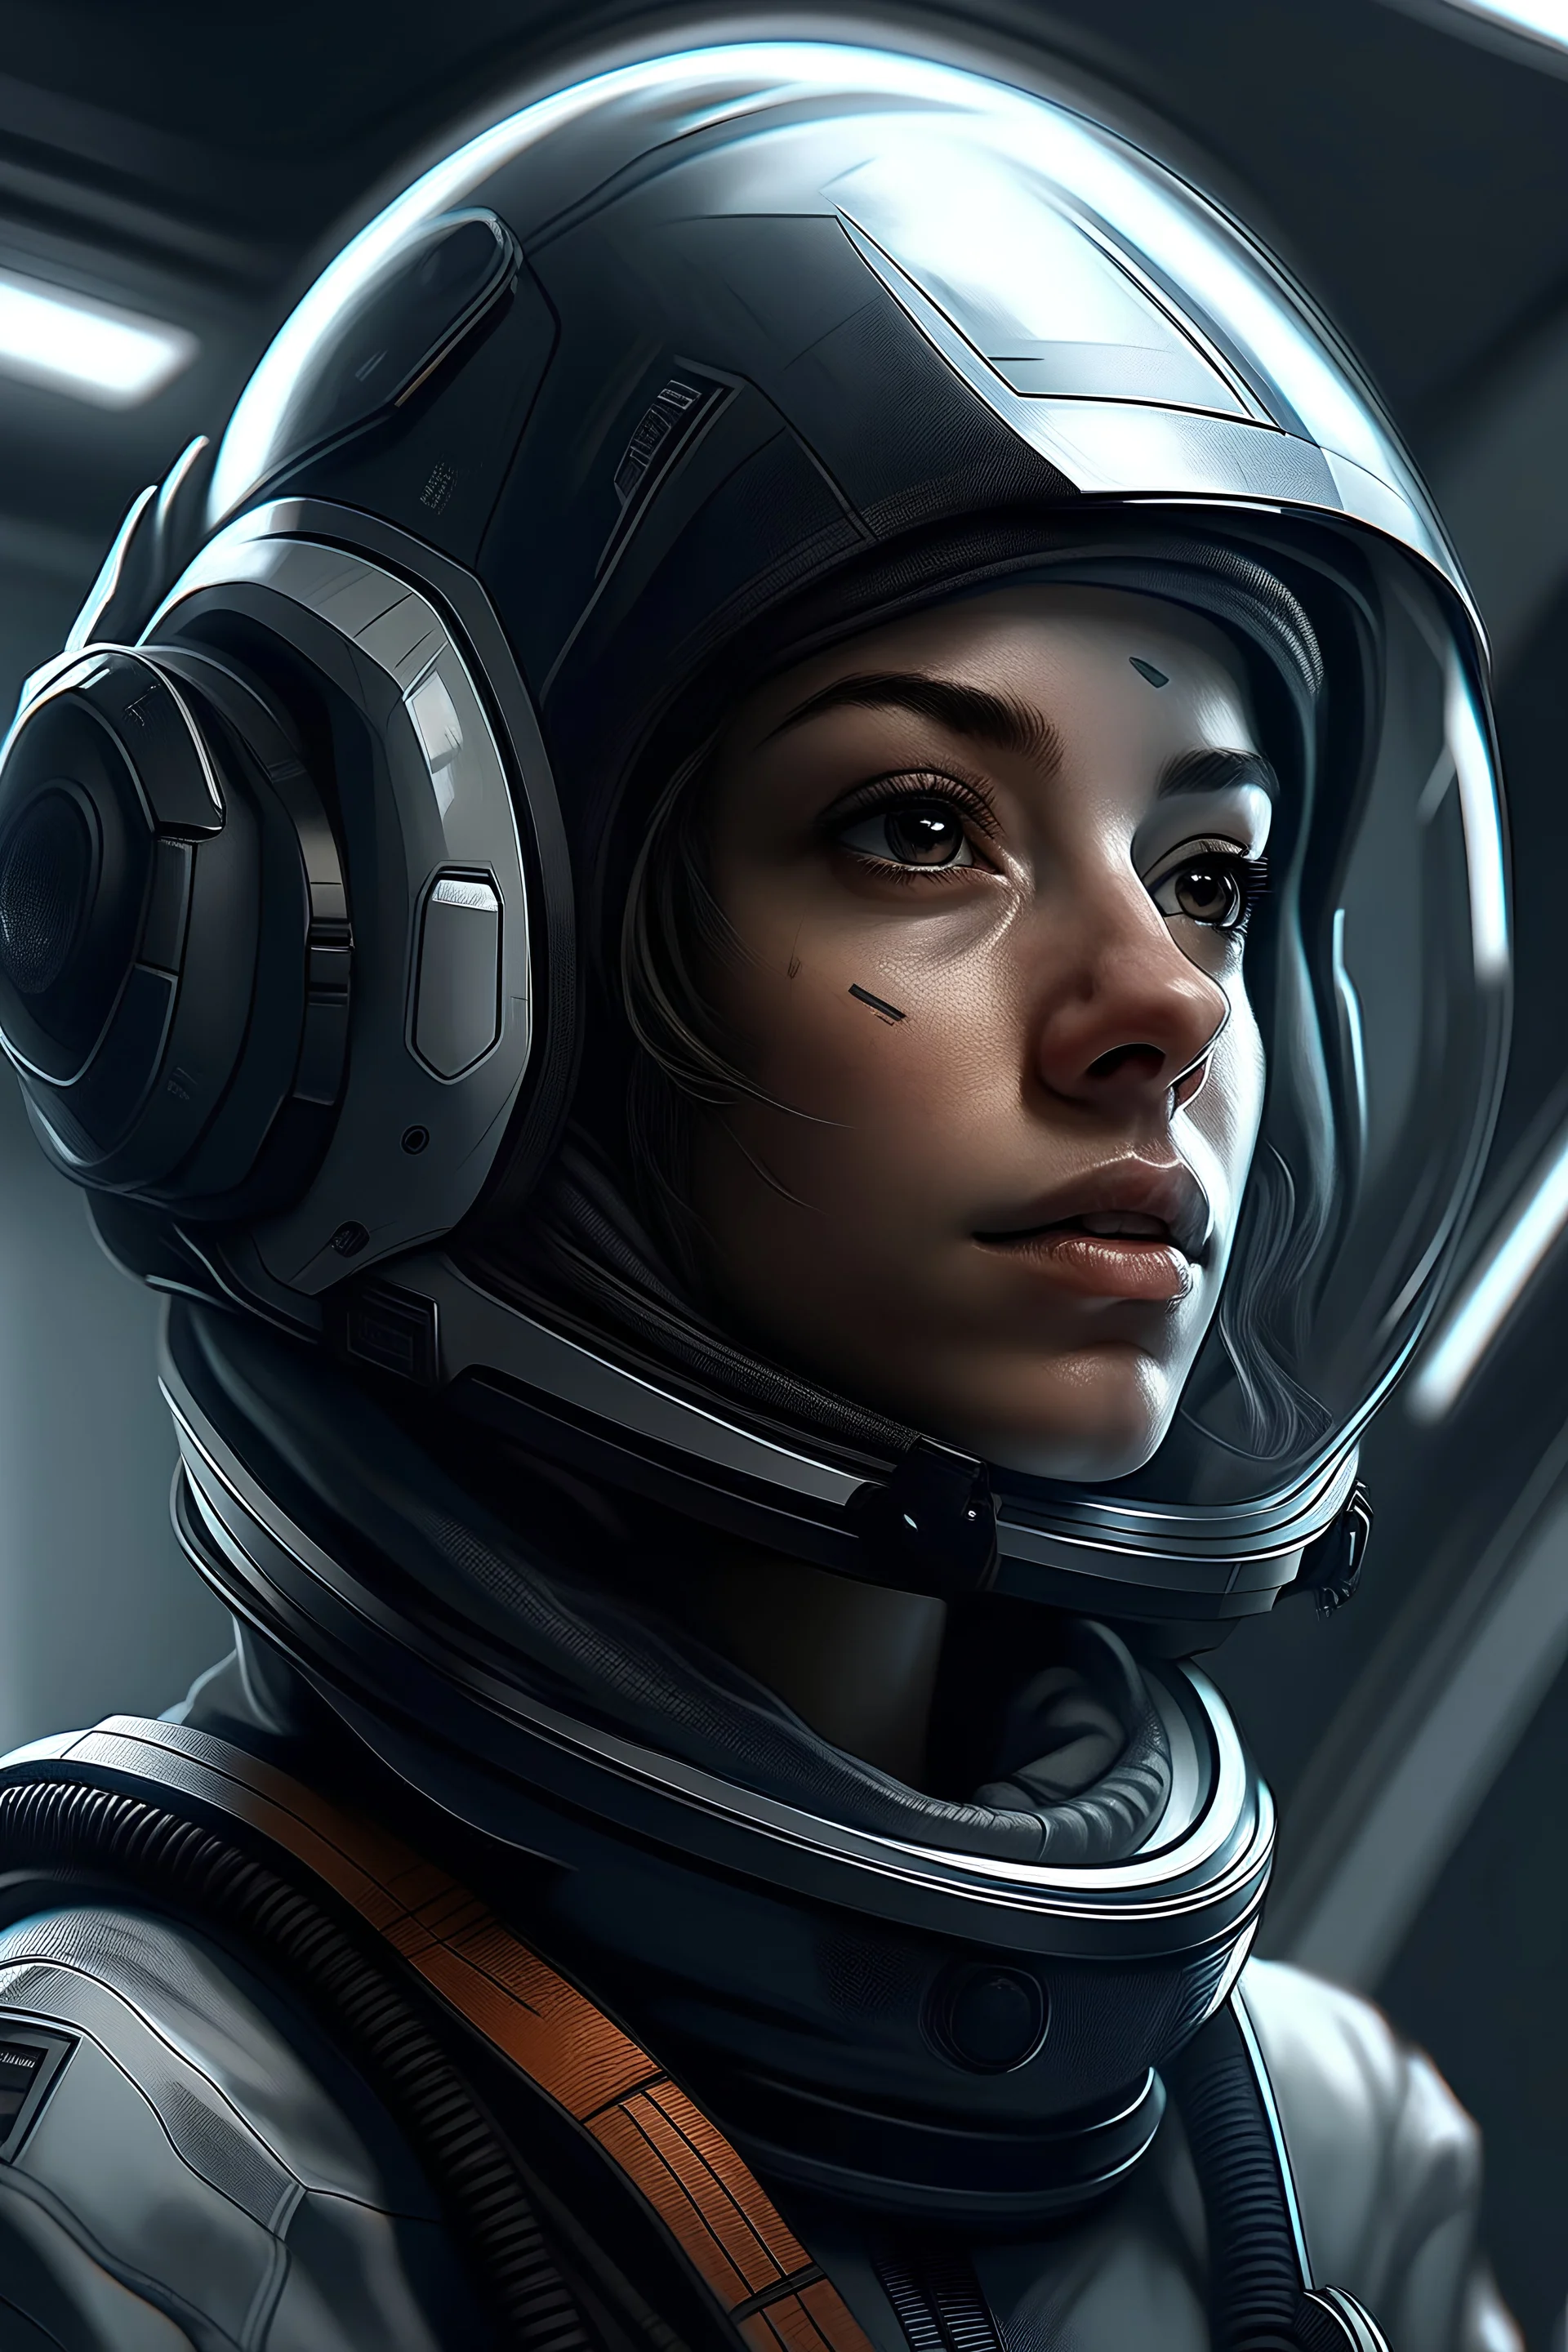 A DIGITAL ART portrait of a sci-fi pilot woman. Style from The Expanse. She is 30 years old. She has a pilot helmet. She is reckless. She has got dreams. Her eyes are beautiful and bright. Grey. seen from across a room